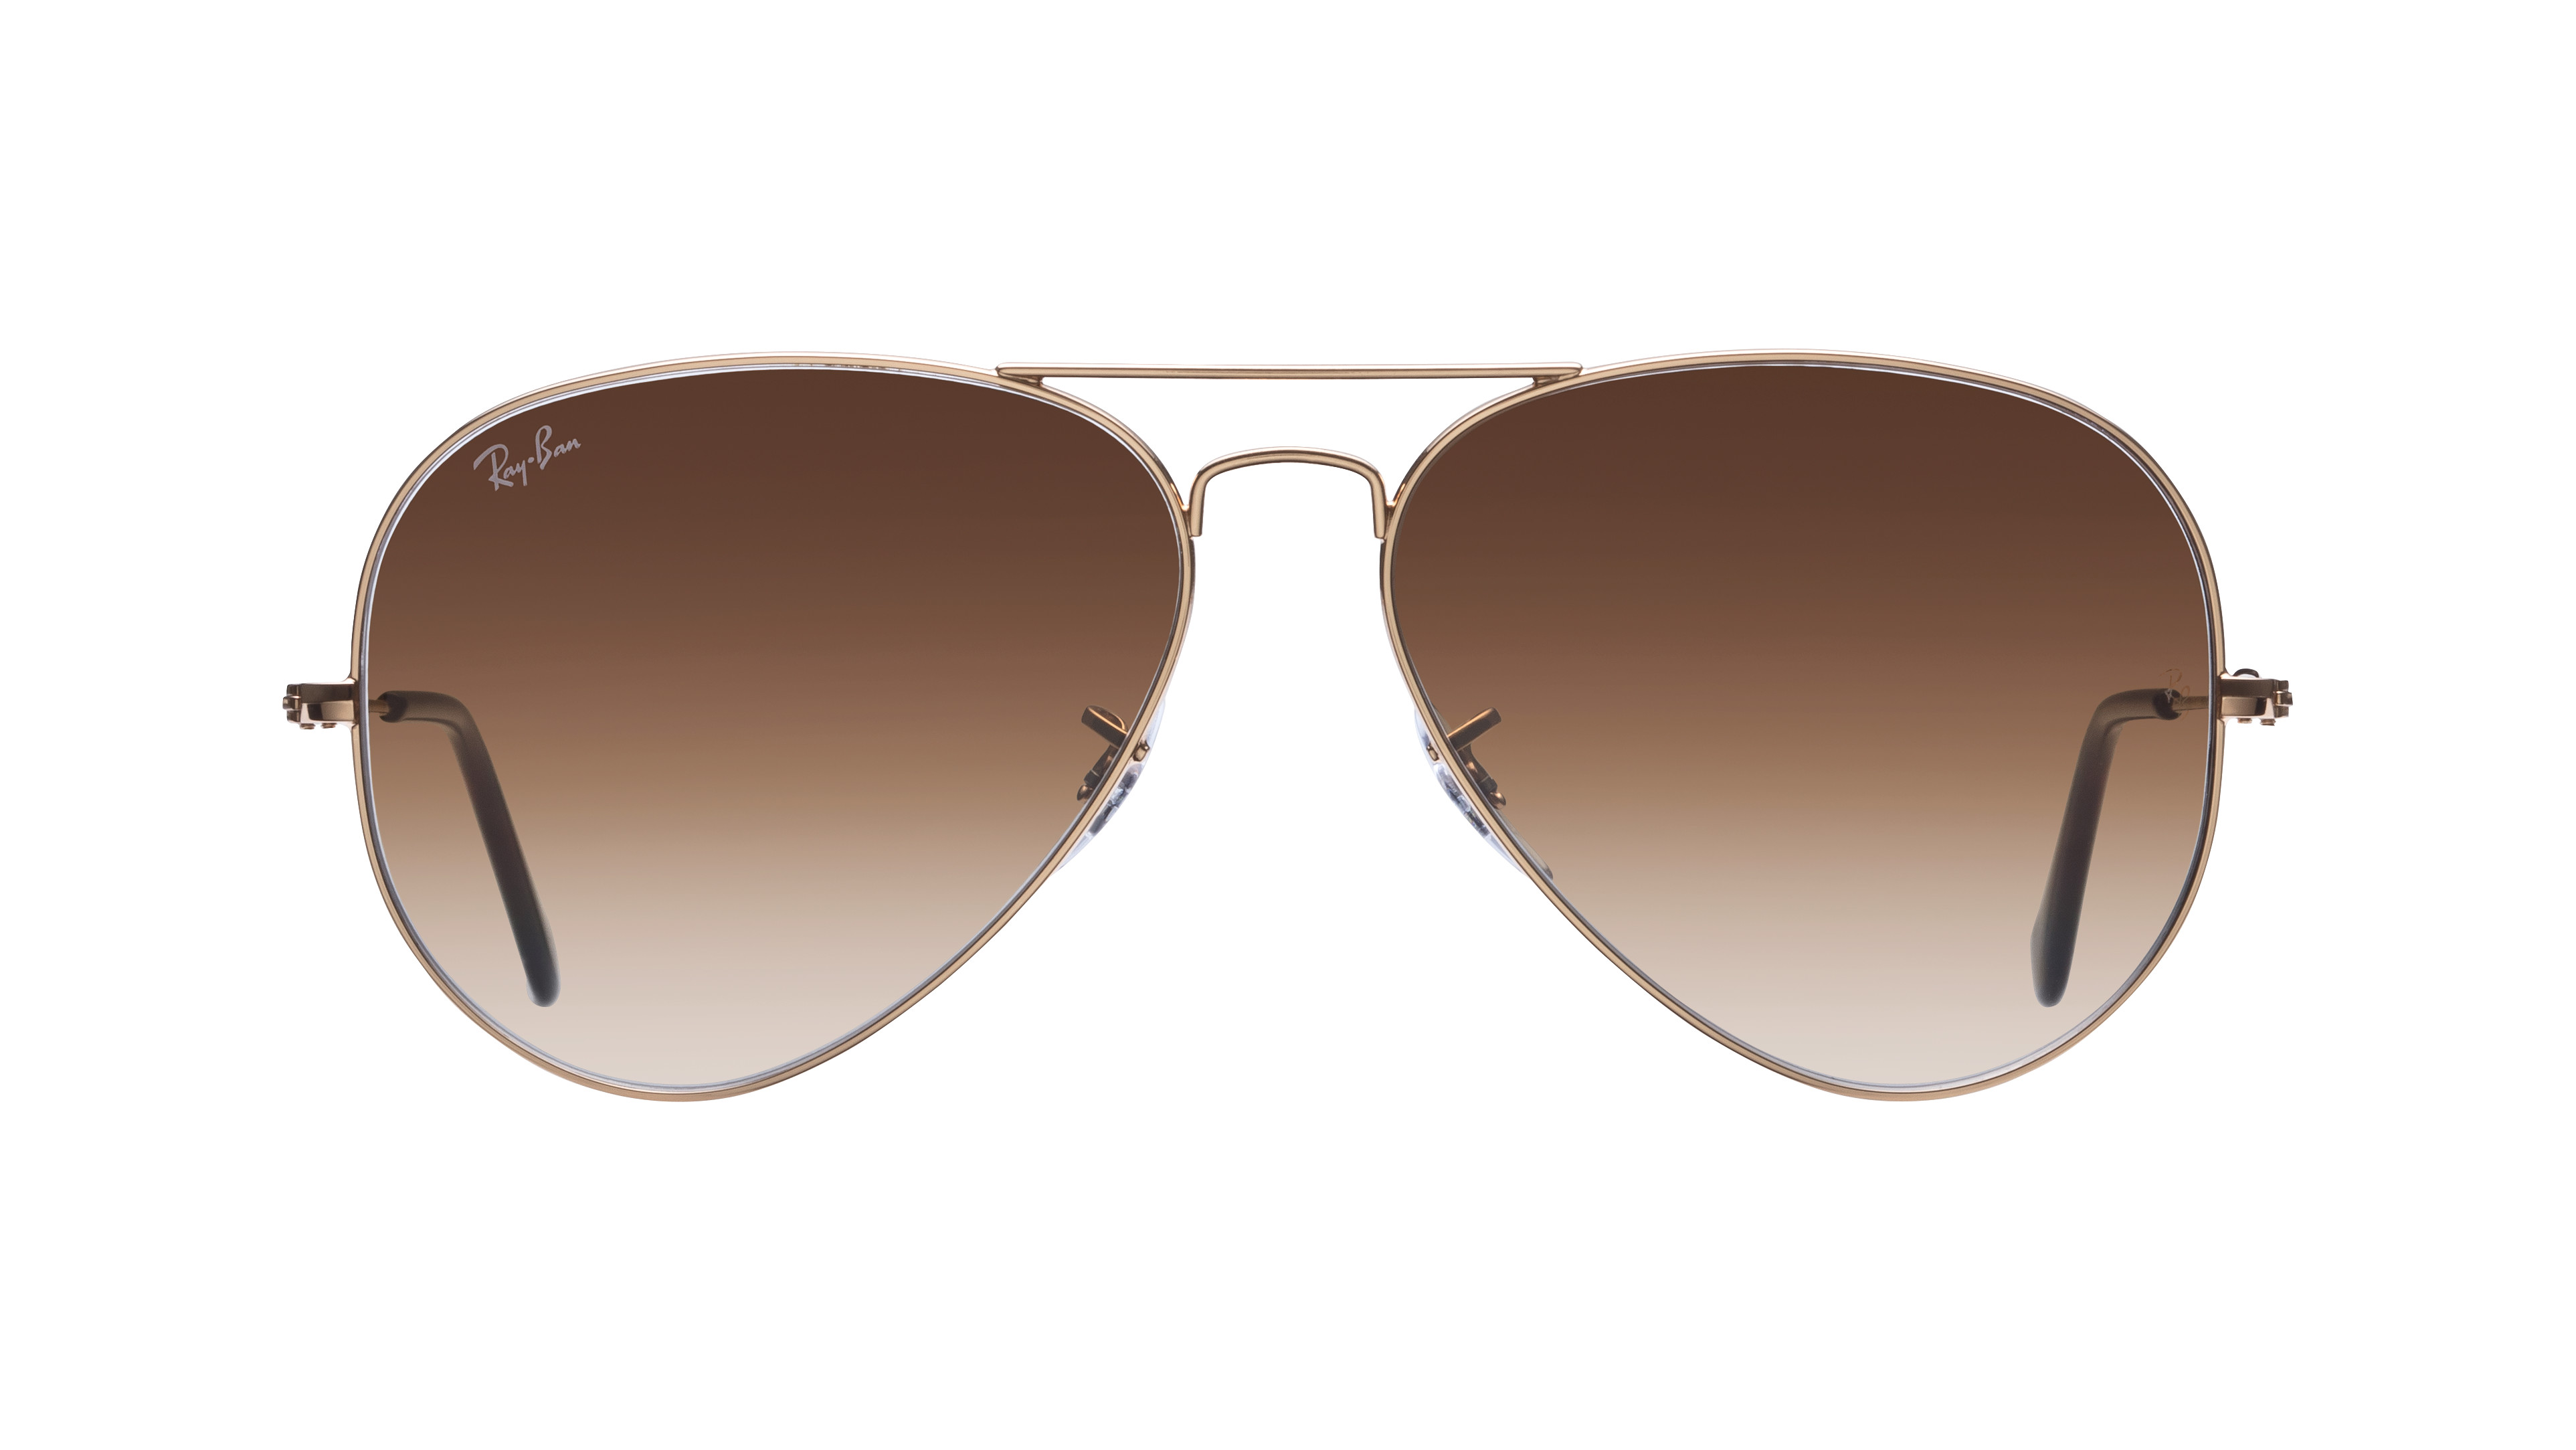 [products.image.front] Ray-Ban AVIATOR LARGE METAL 0RB3025 001/51 Sonnenbrille